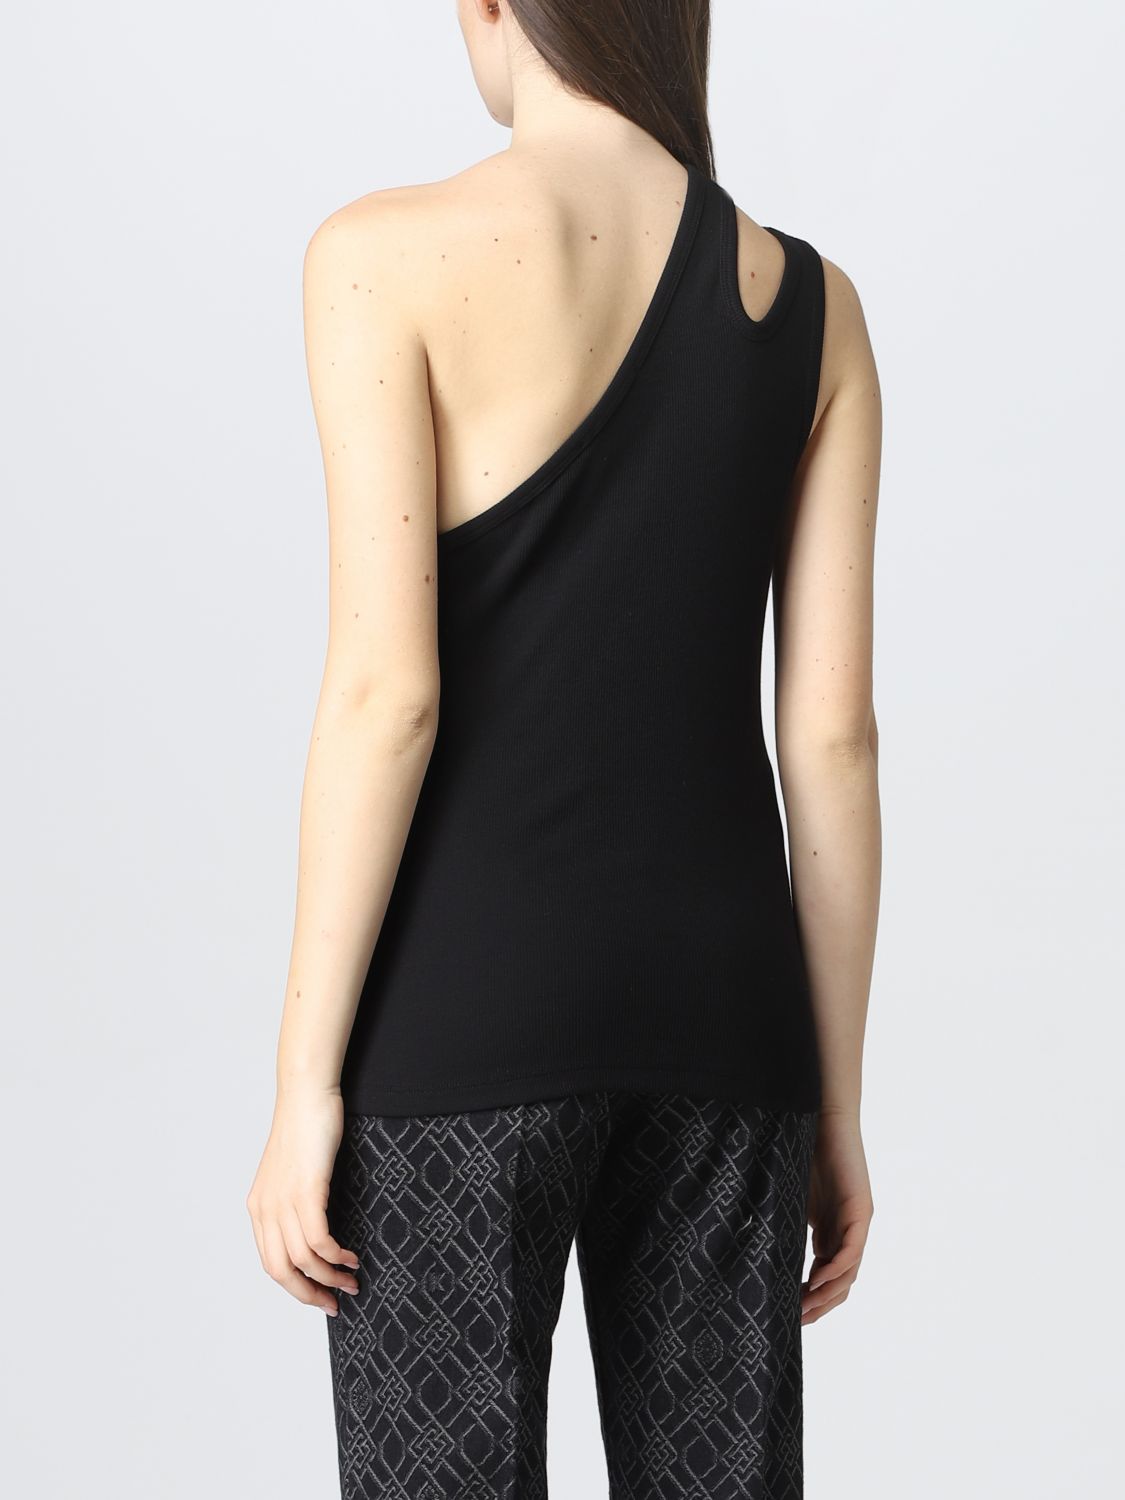 Top Remain: Remain top for women black 2